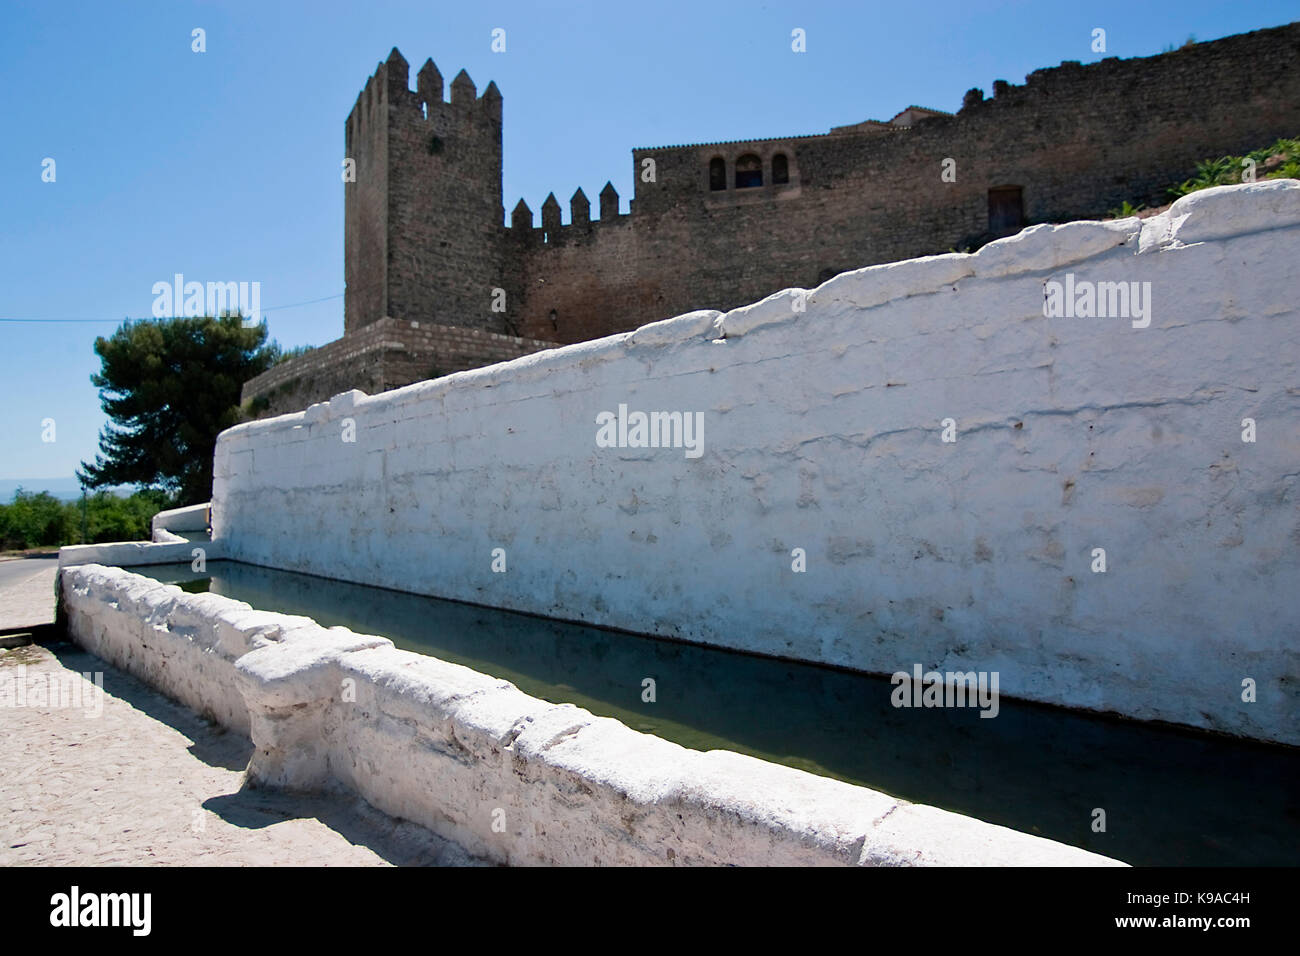 Drinking trough for farm animals and Tower of the Barbacana, Sabiote, Jaen, Spain Stock Photo